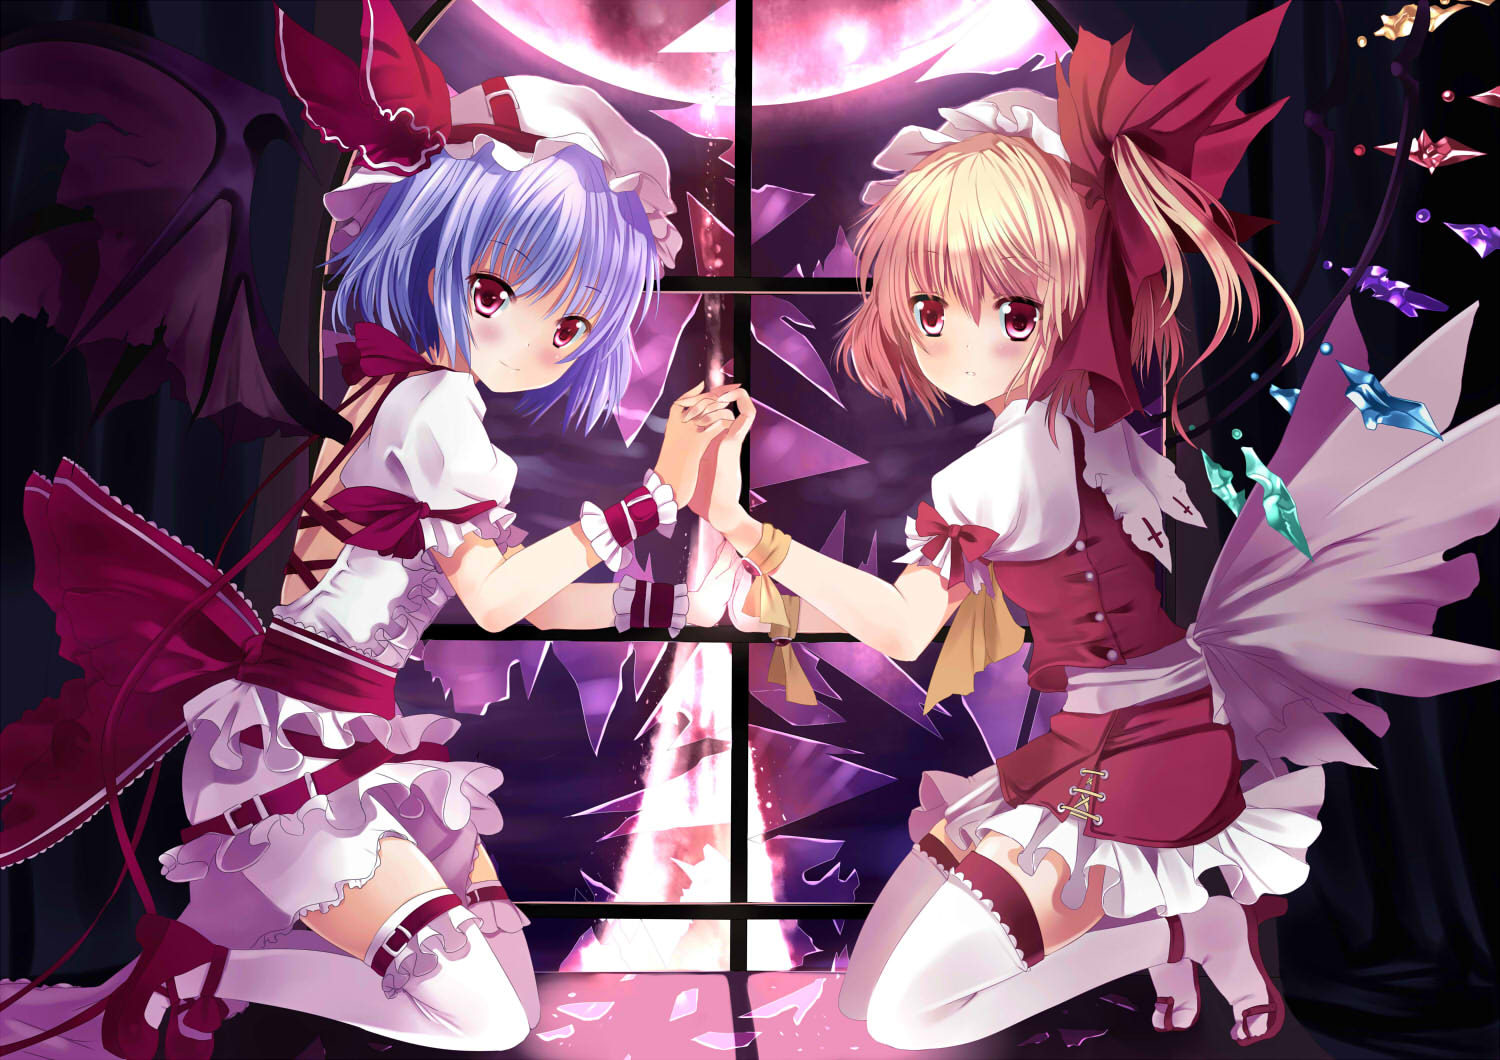 Remilia and Flandre by xephonia